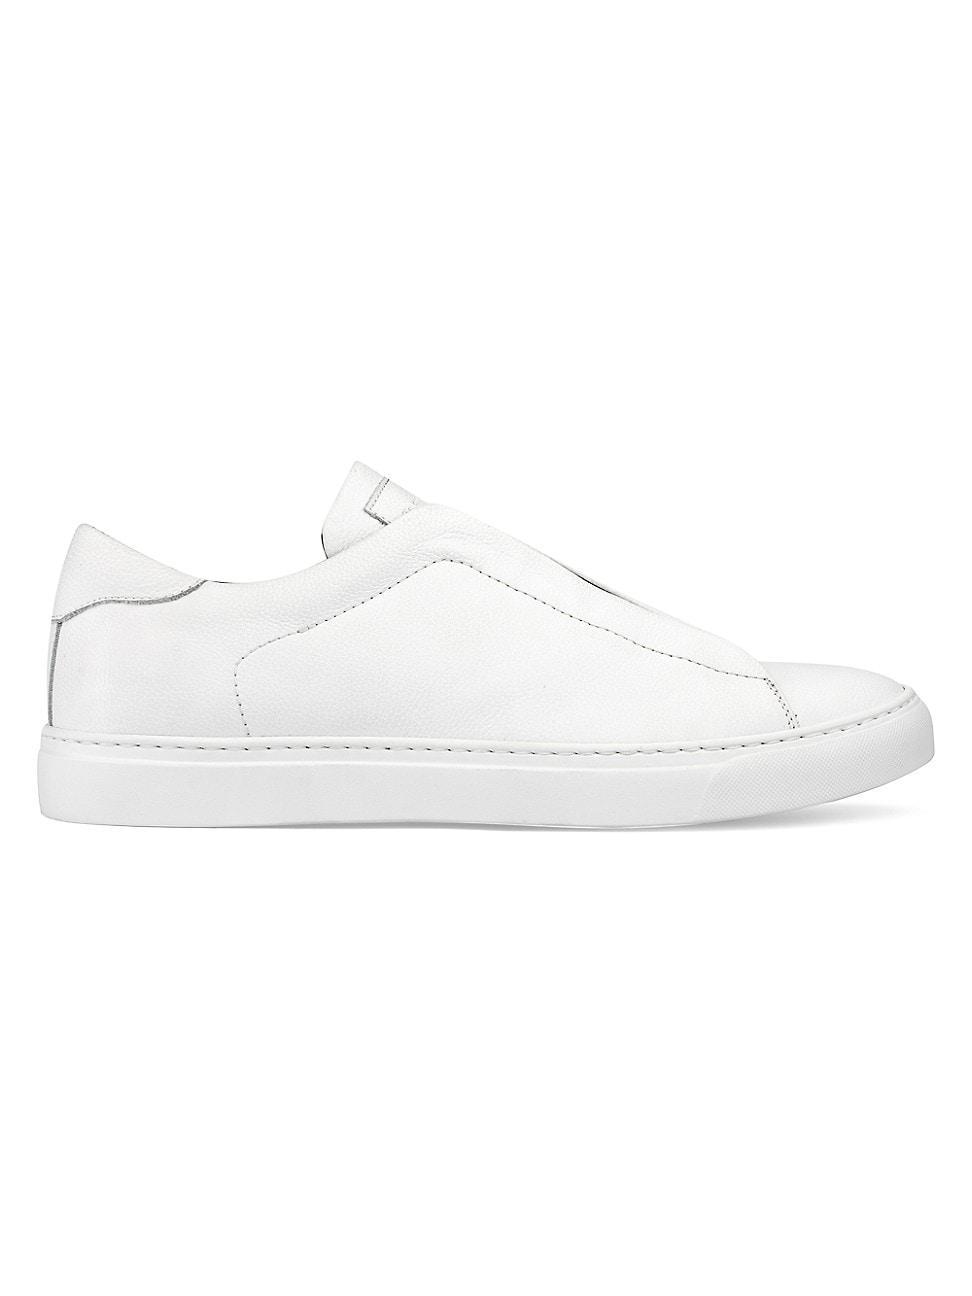 To Boot New York Bolla (White) Men's Shoes Product Image